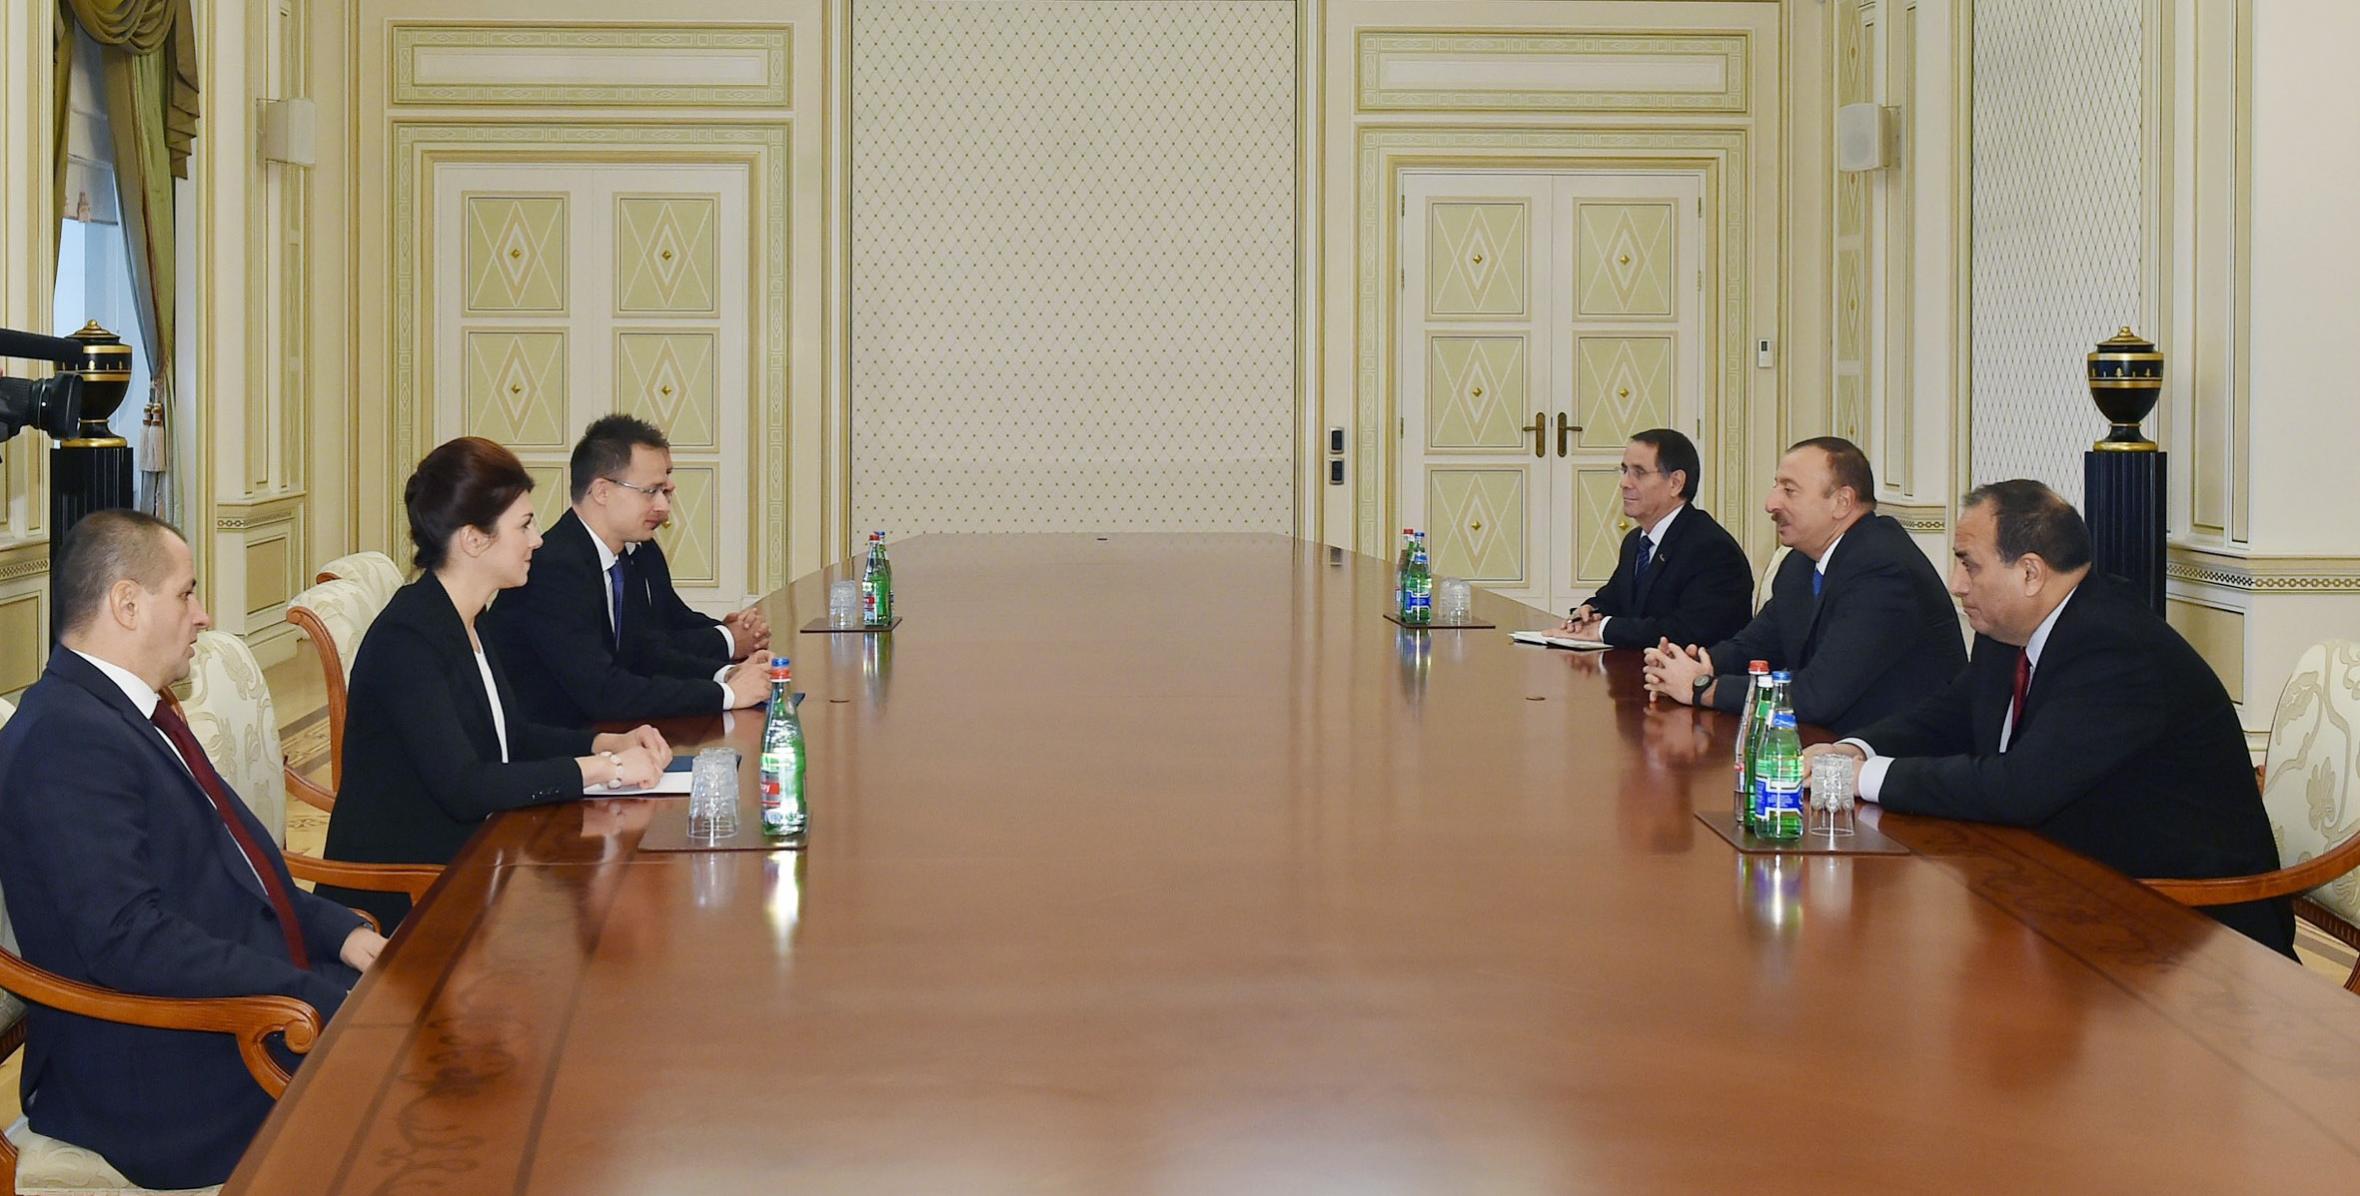 Ilham Aliyev received a delegation led by the Hungarian Minister of Foreign Affairs and Trade